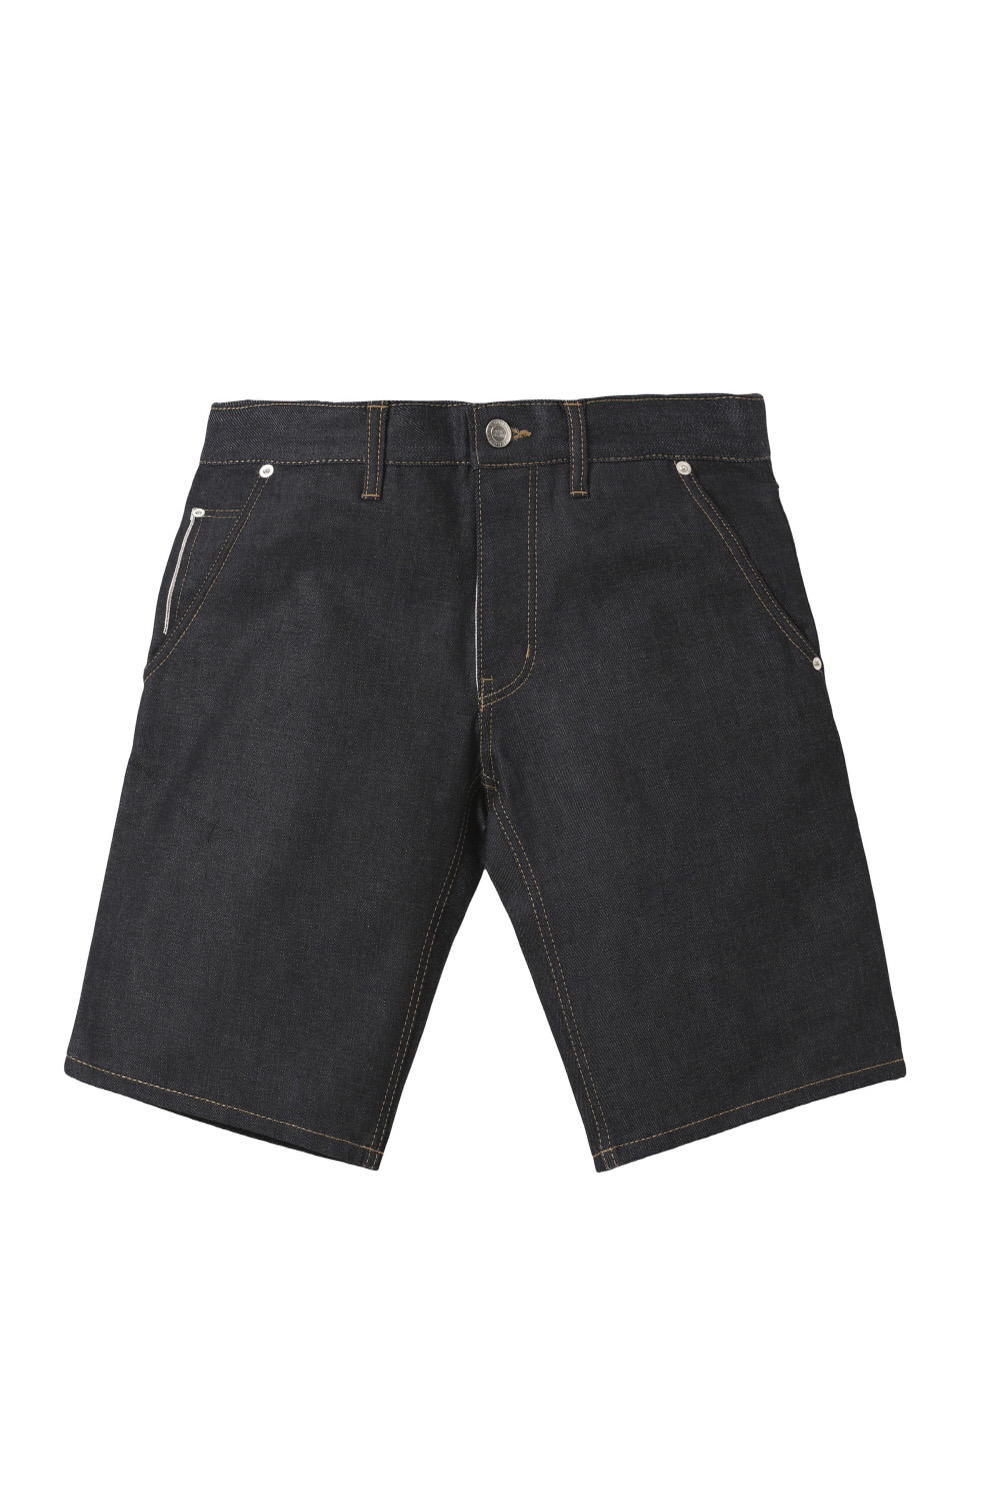 SELVAGE RAW SHORT JEANS